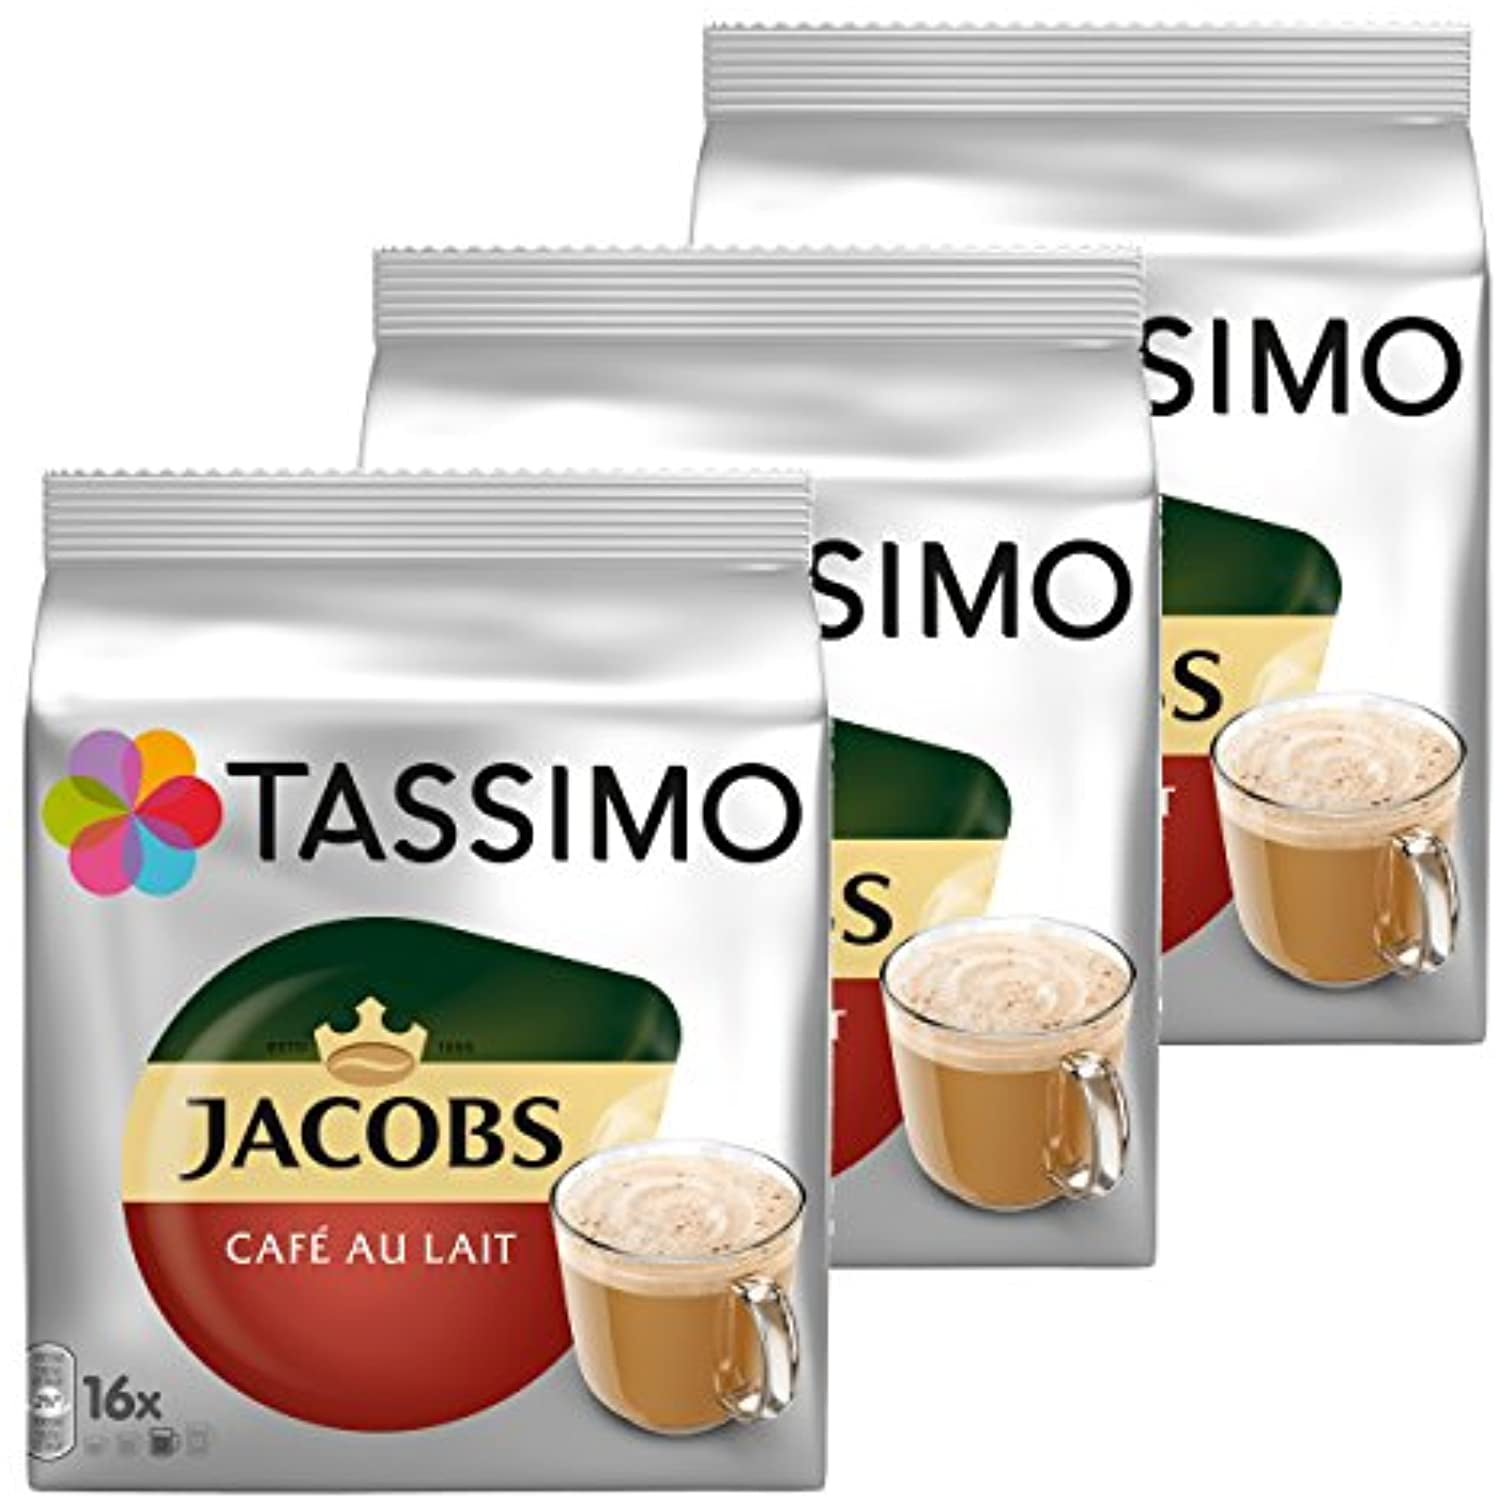 TASSIMO Coffee Capsules T-Disc Pods / Mixed Variety Packs of 20,36 or 48  t-discs